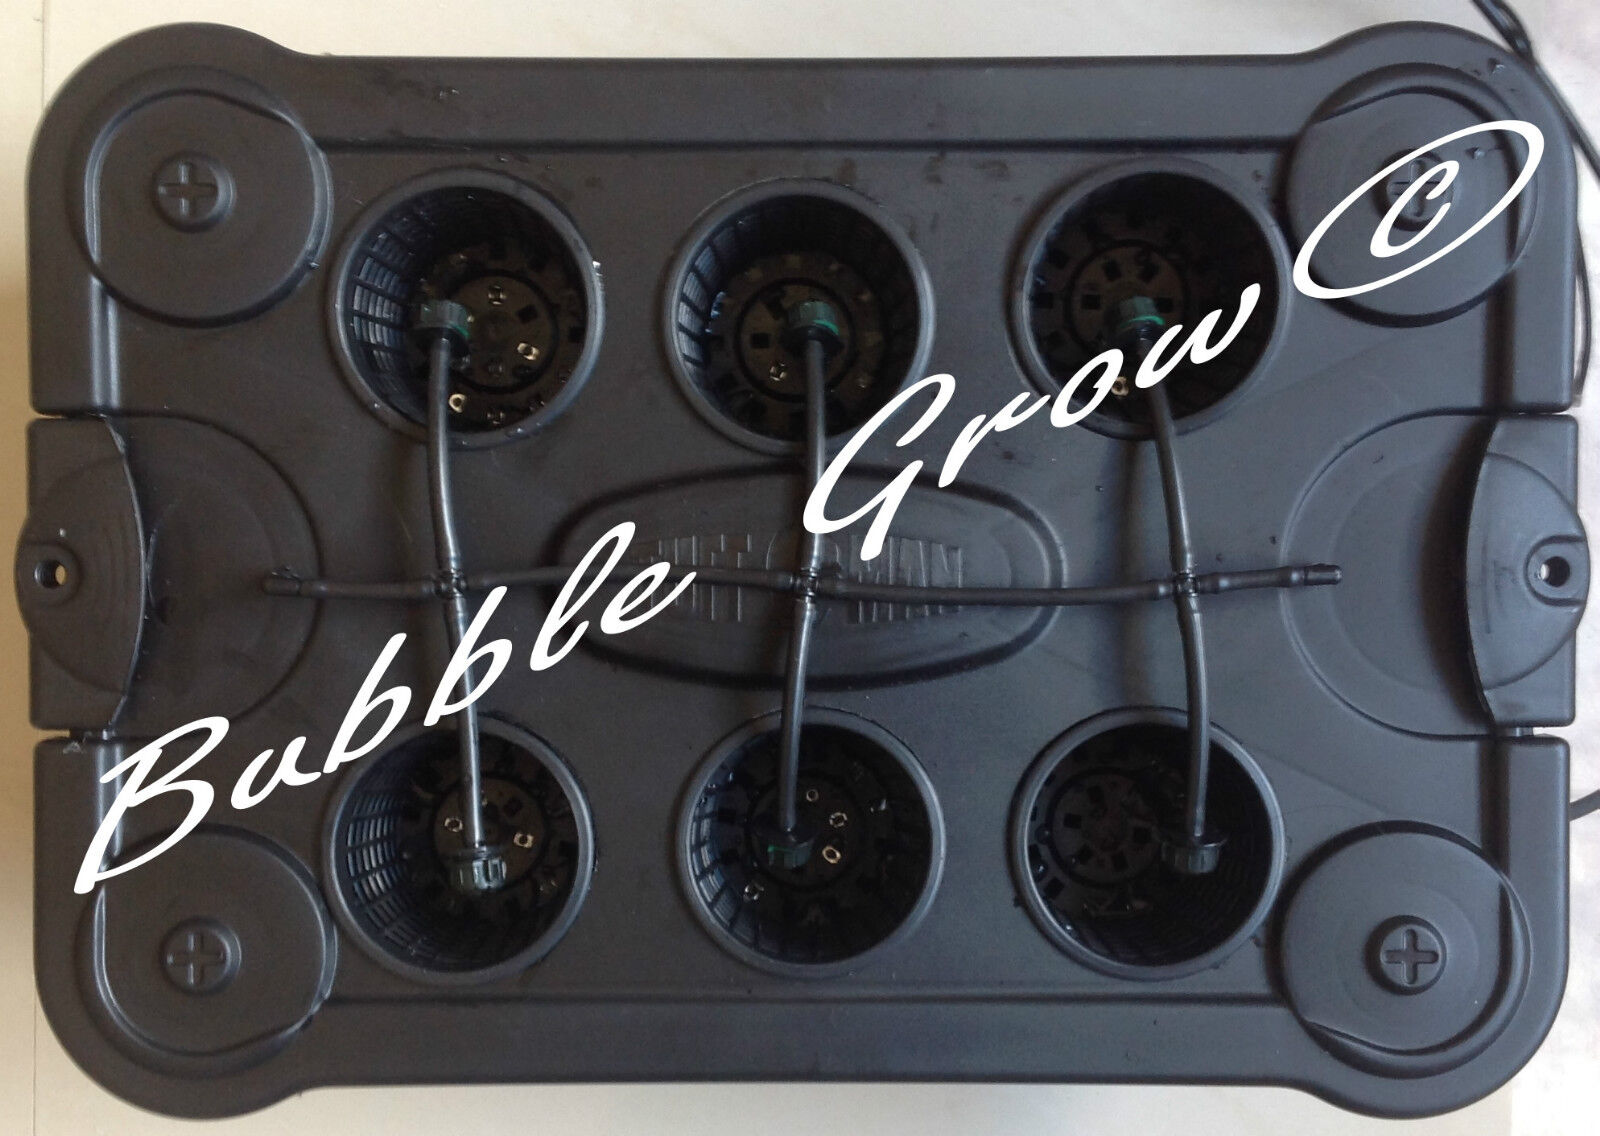 Bubble Grow STARTER 6 Drip Hydroponic System Top Feed Bubbleponic DWCGrowing Kit